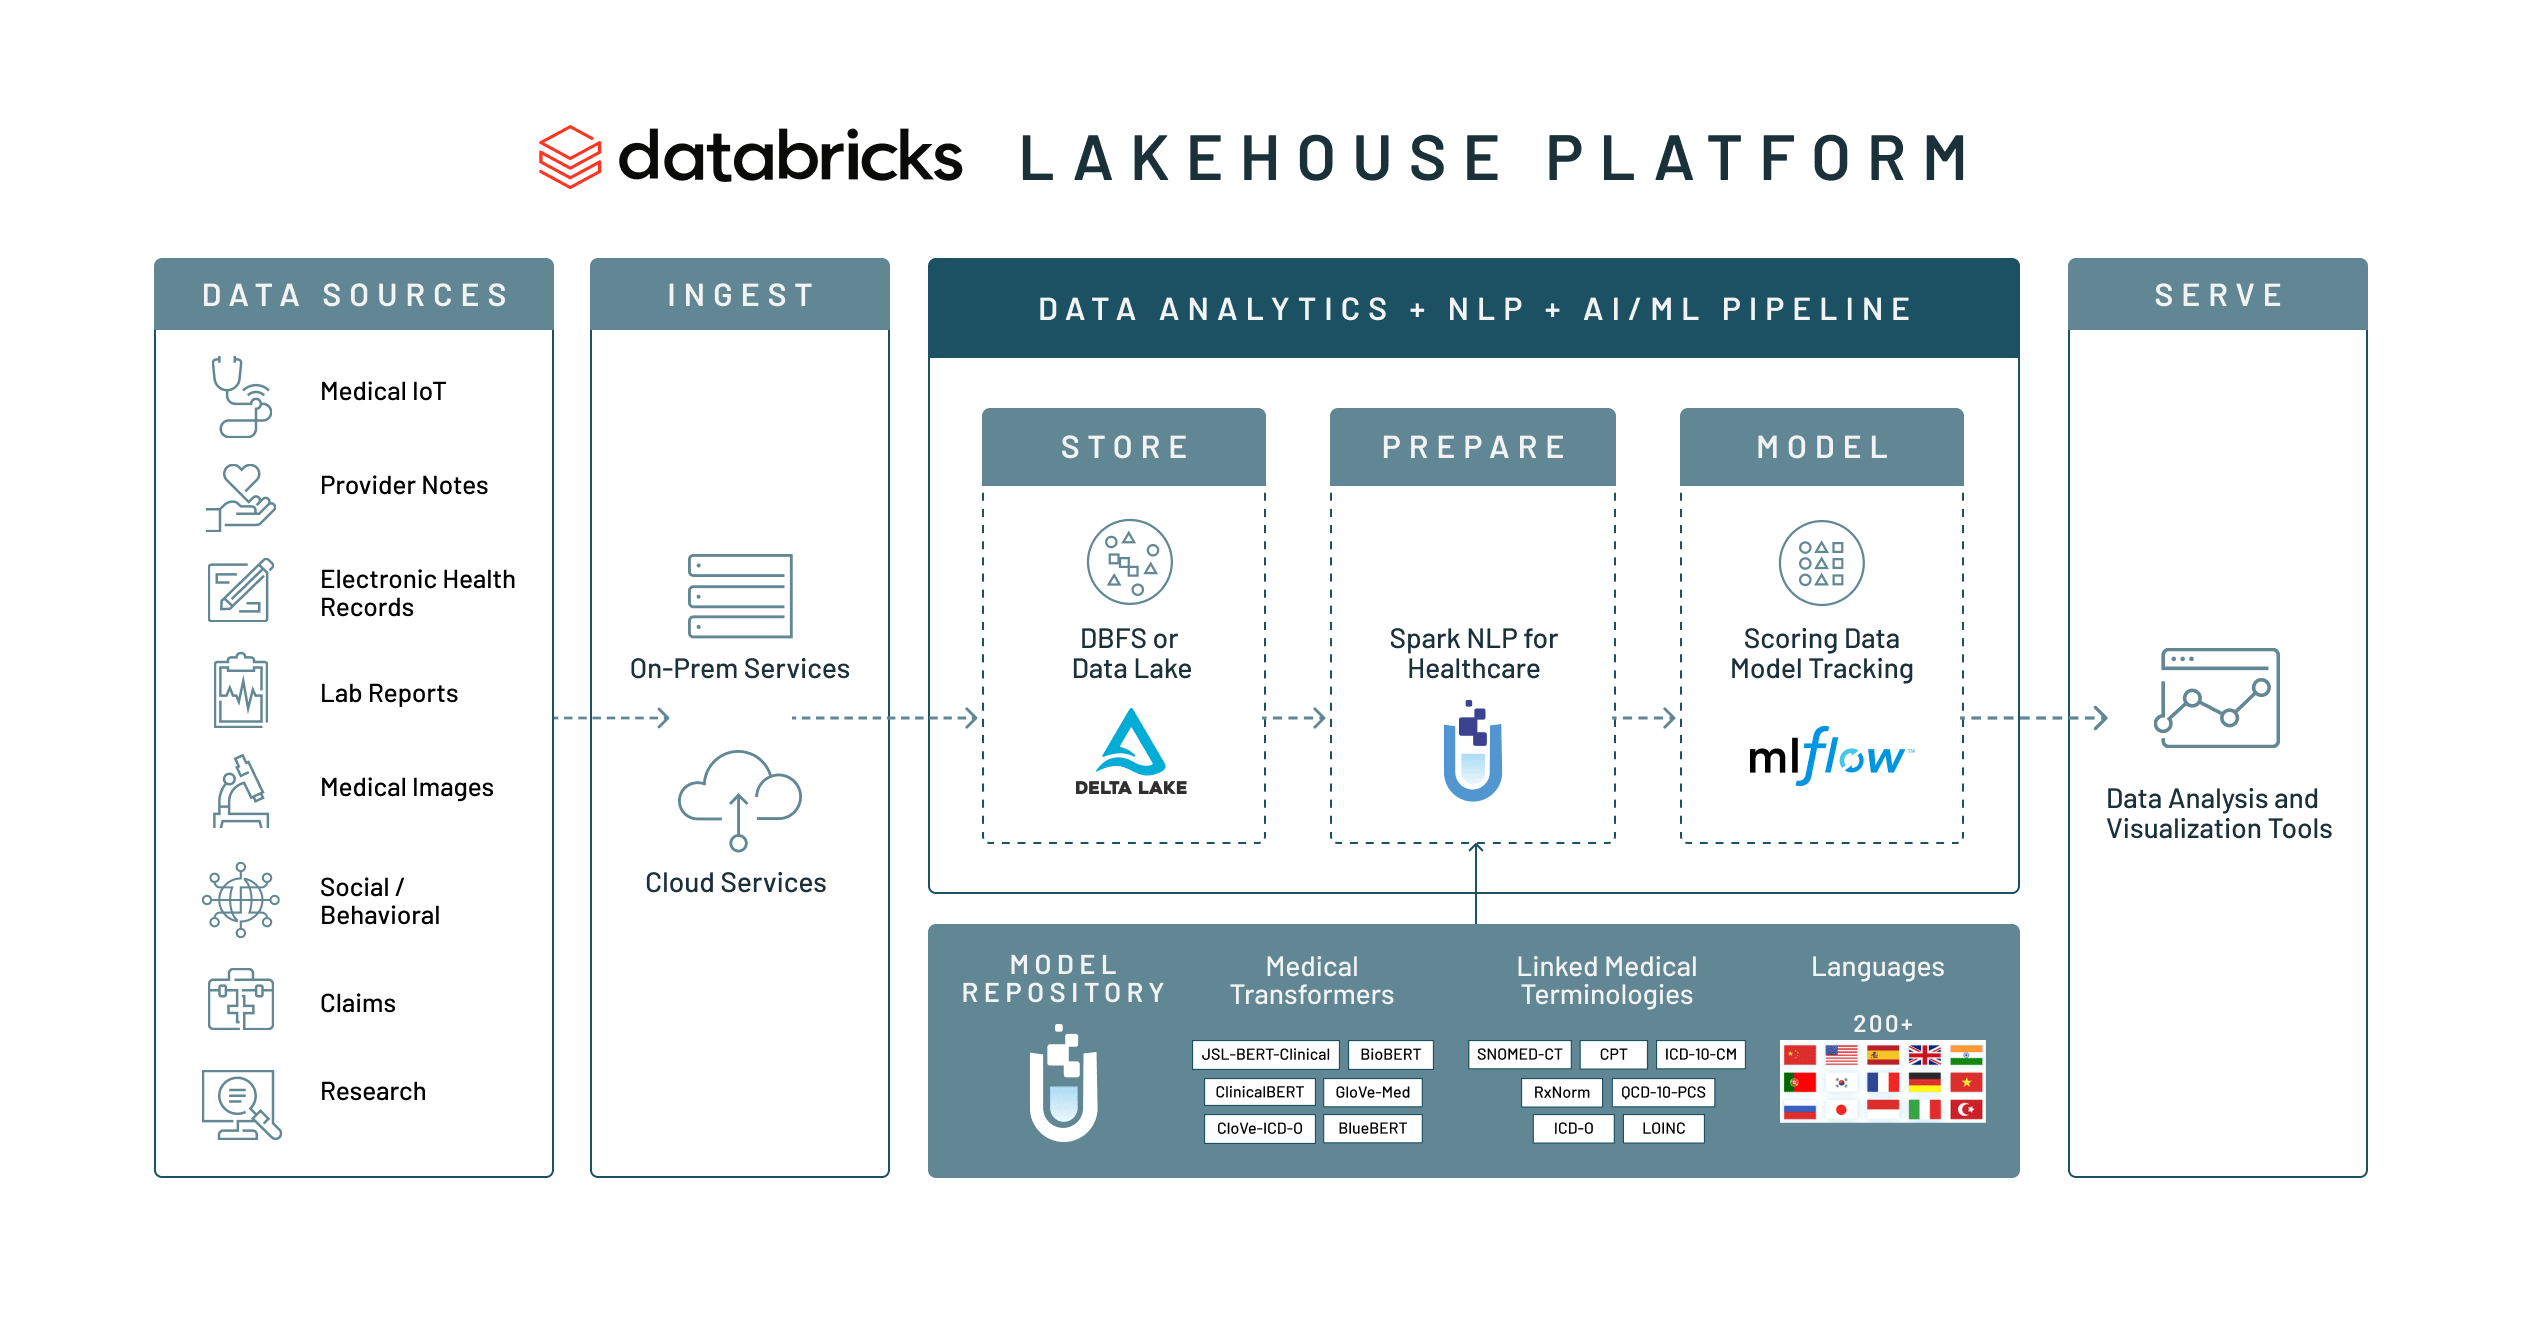 An end-to-end workflow for processing, analyzing and modeling all of your data including clinical text with Databricks and John Snow Labs.